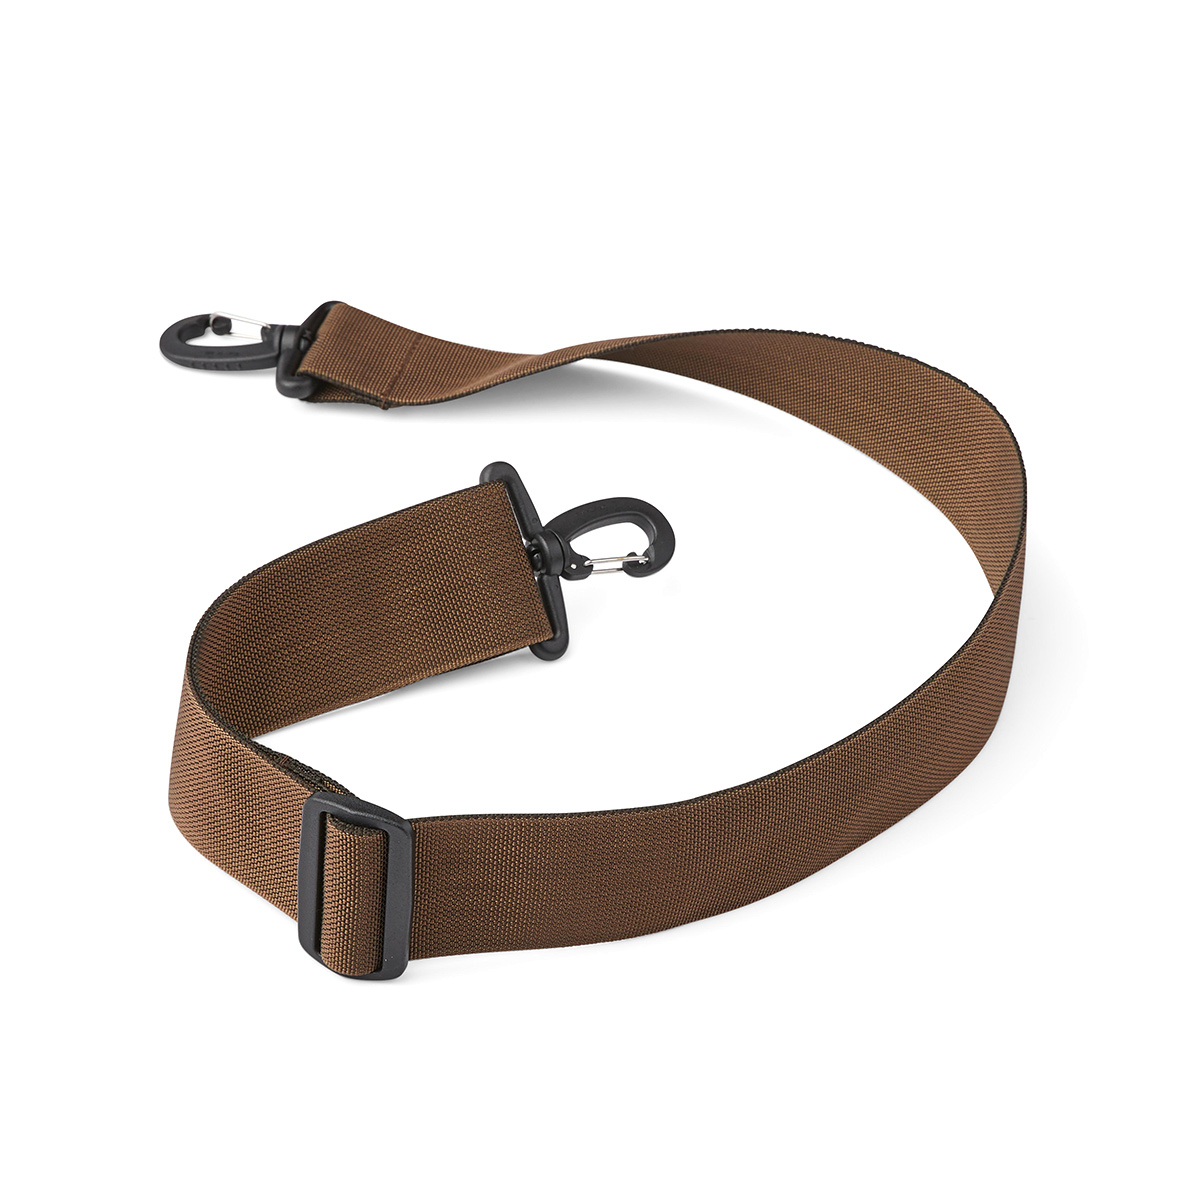 Filson Duffle Webbing Shoulder Strap Brown, replacement for a